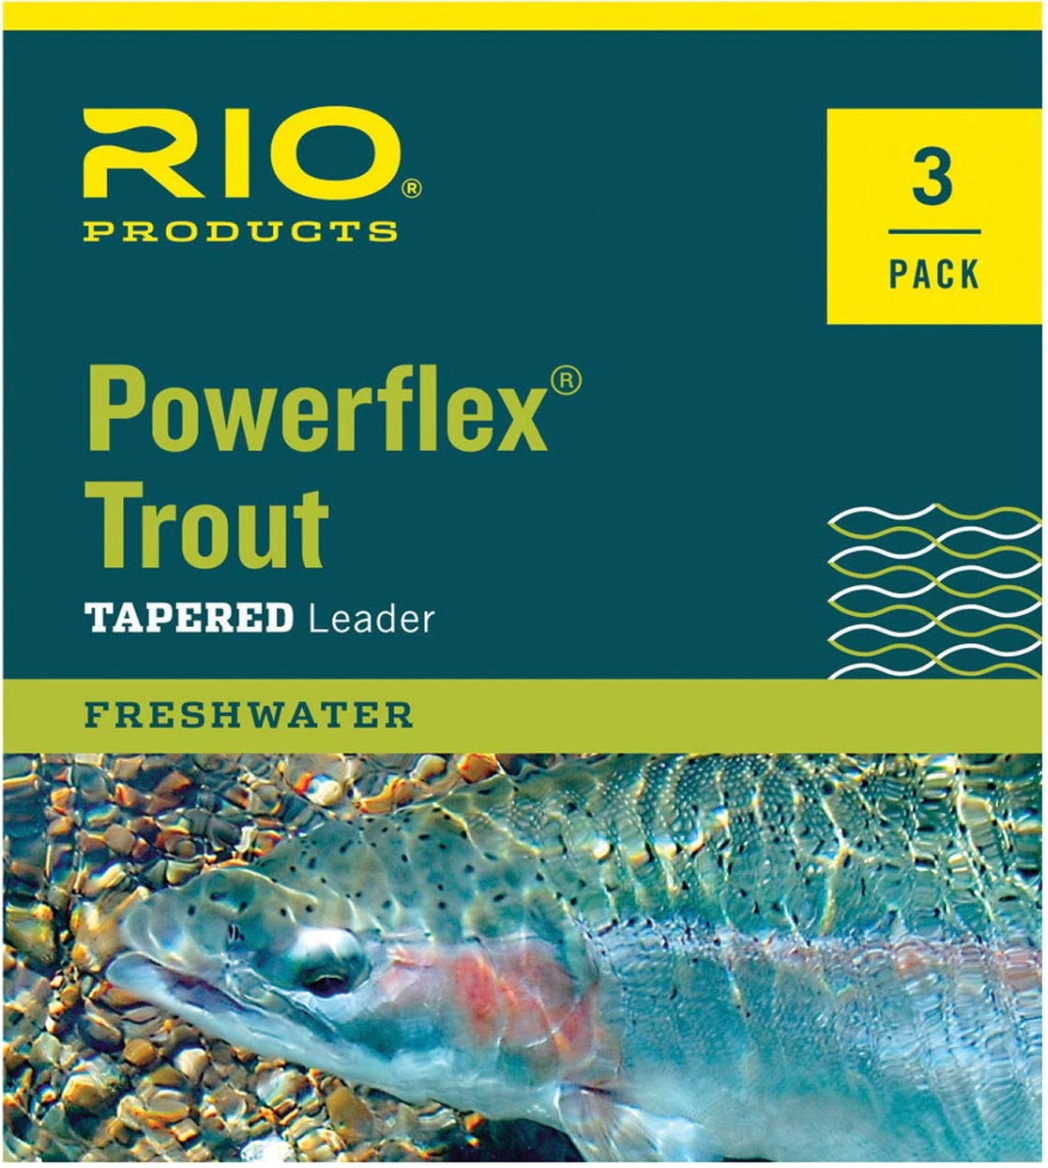 RIO Powerflex Trout Tapered Leader 9' x 0x 15lb 3 Pack Fly Fishing